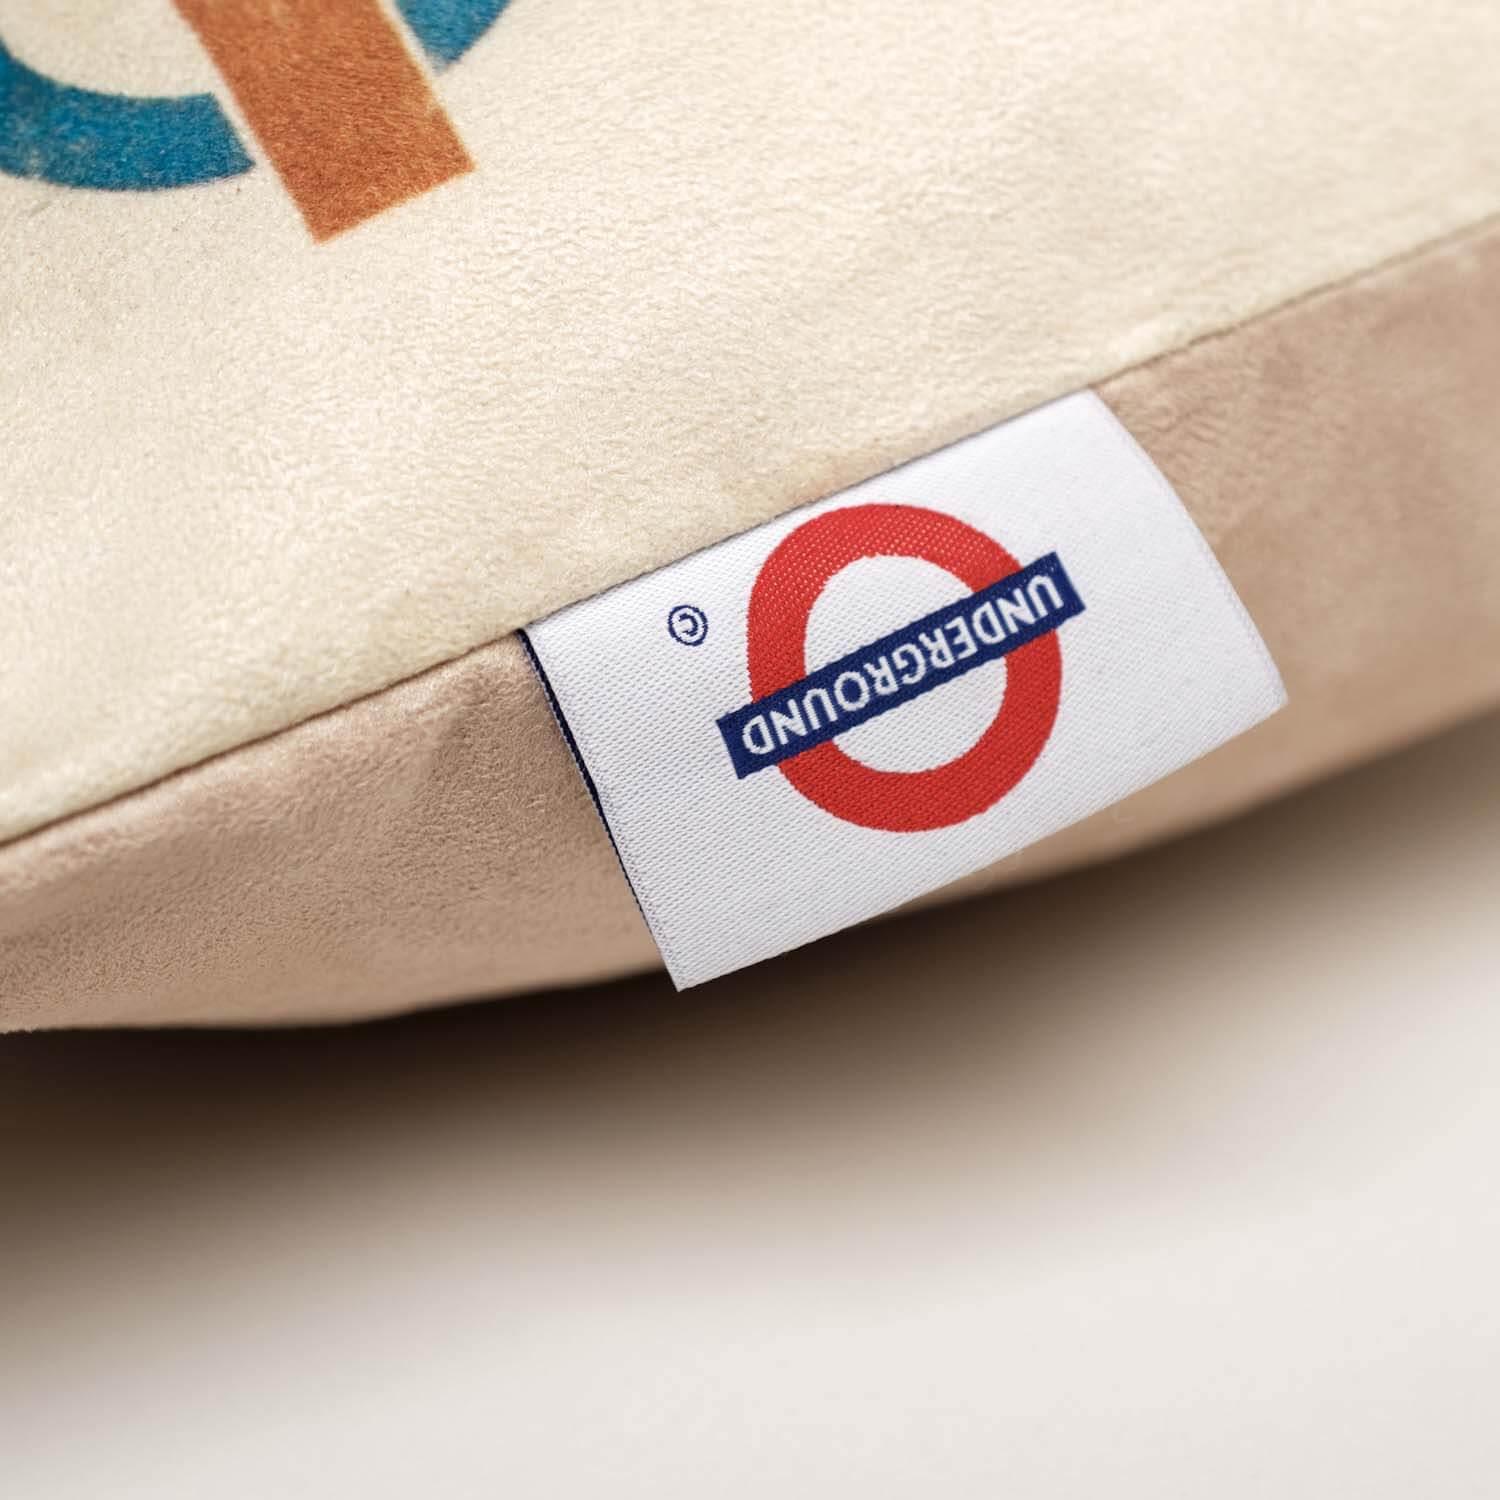 Trooping The Colour - London Transport Cushion - Handmade Cushions UK - WeLoveCushions